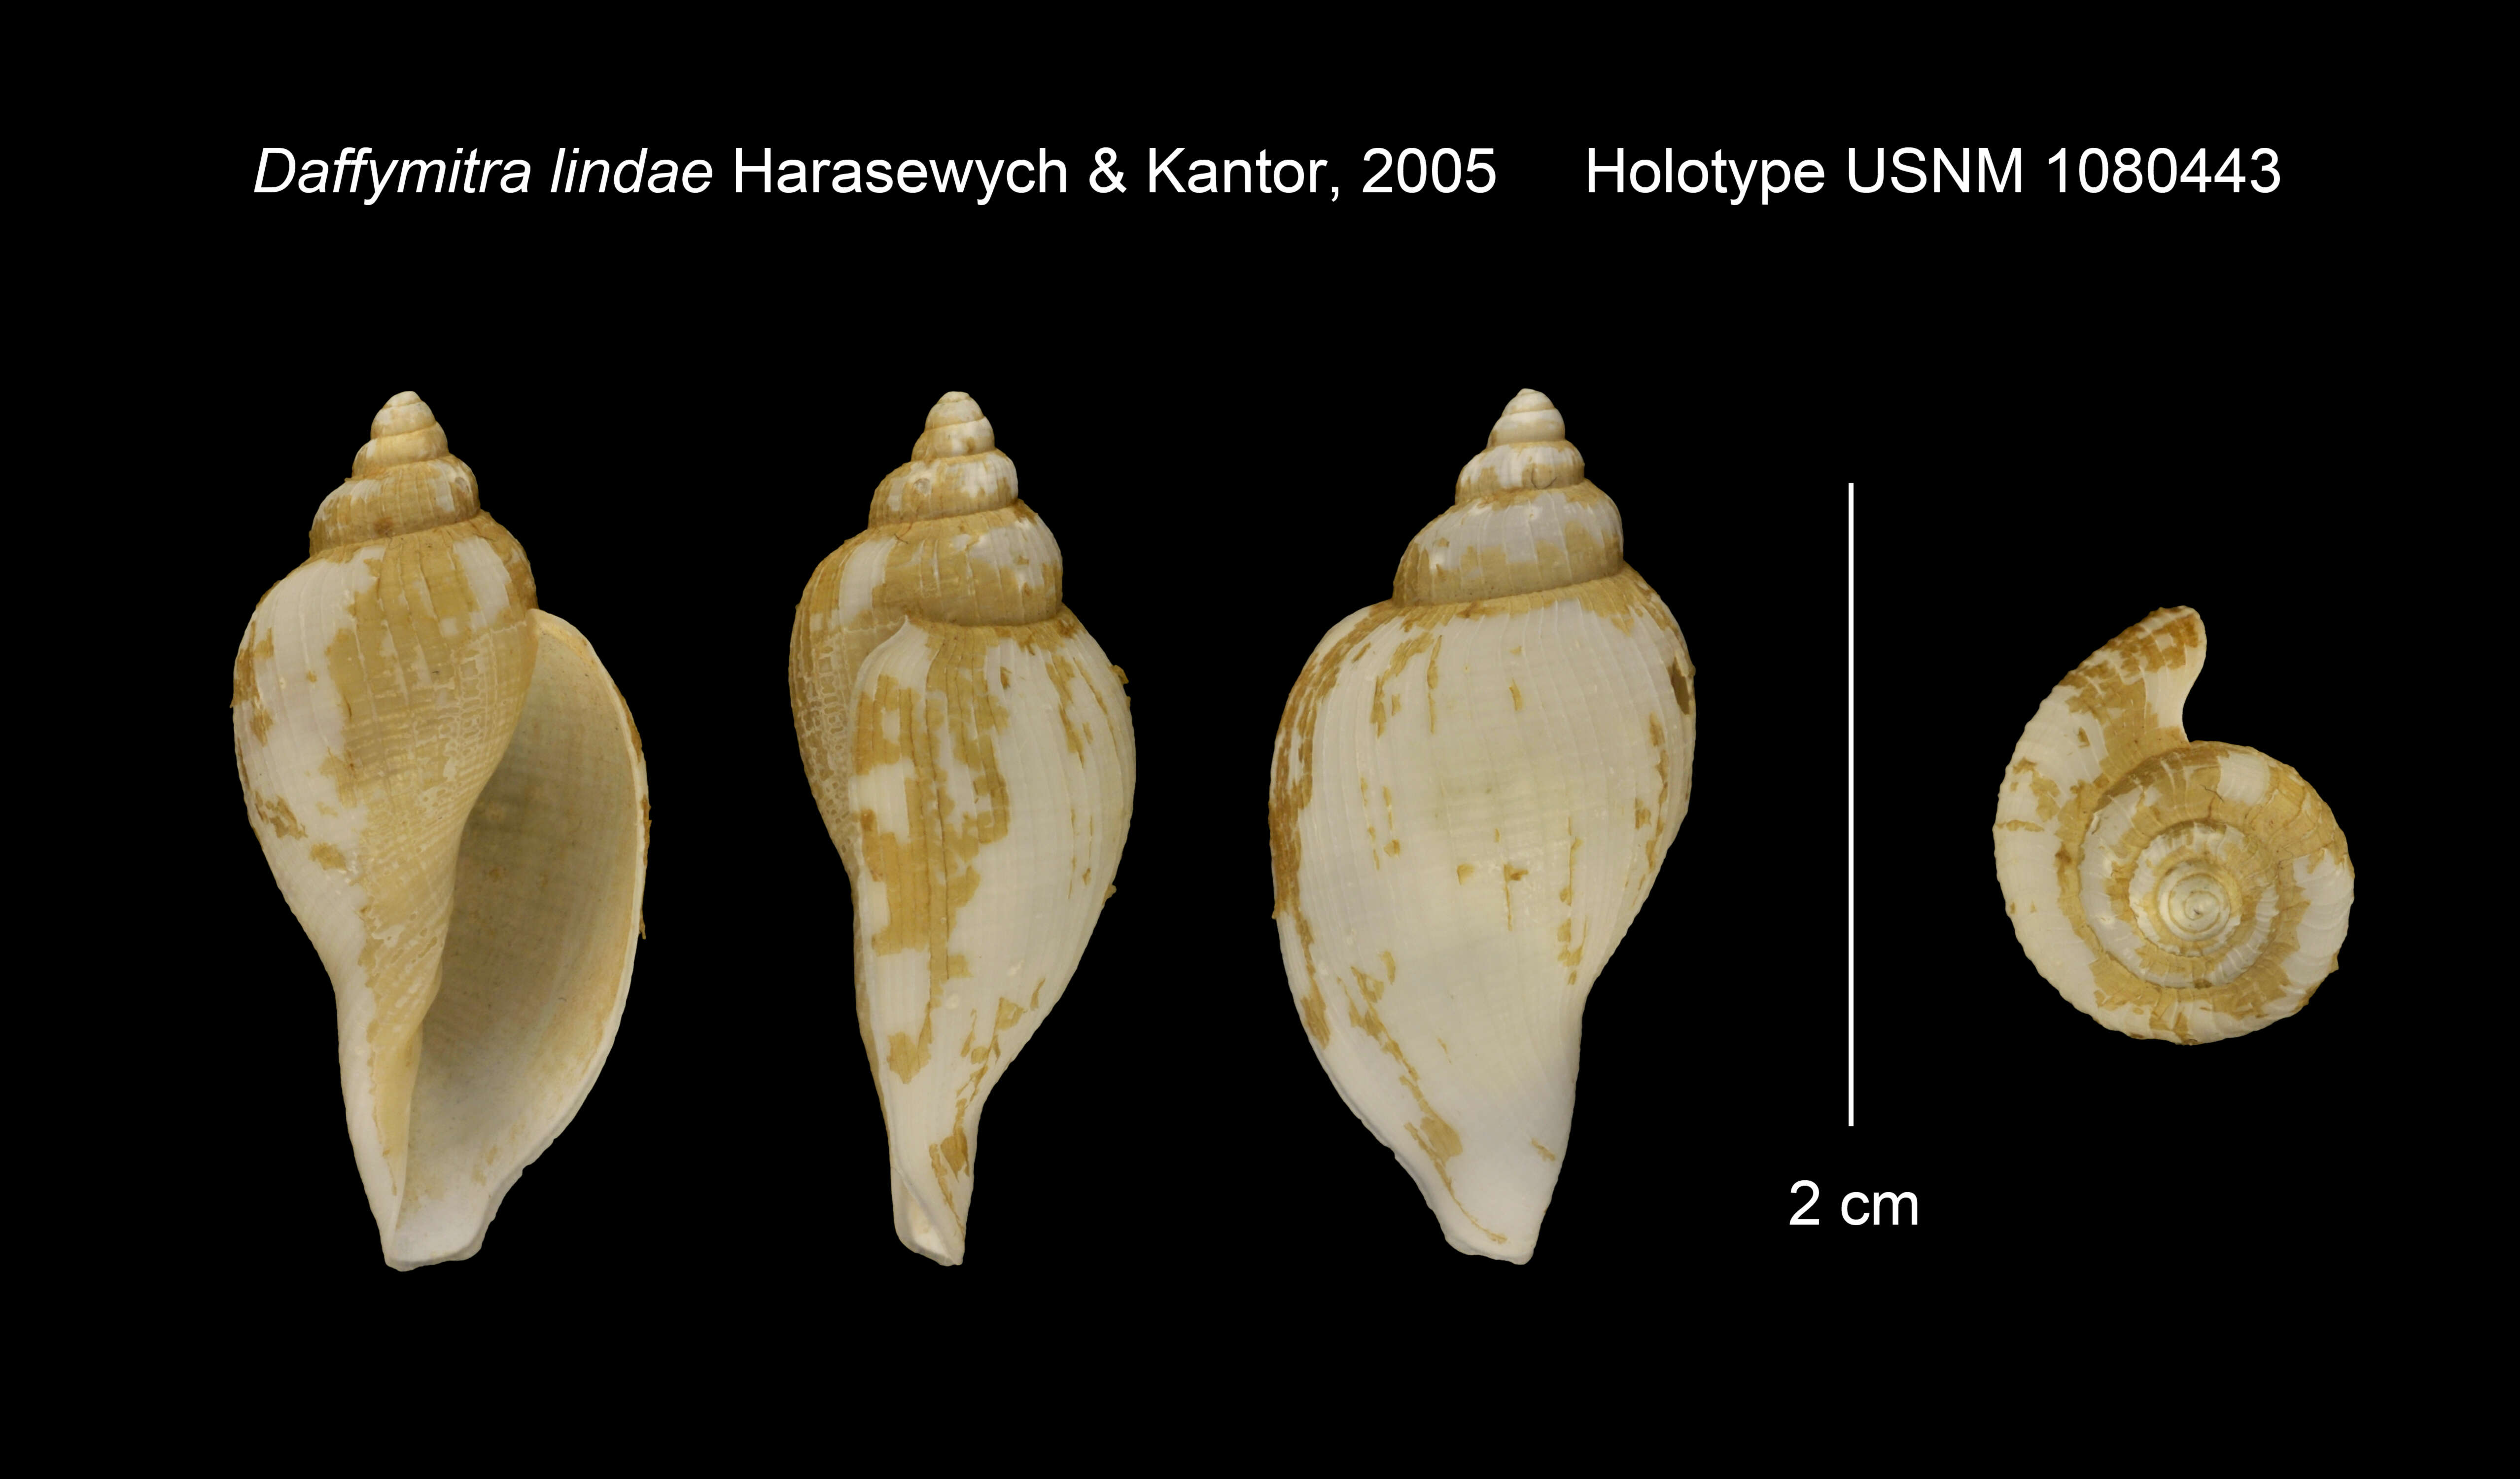 Image of Daffymitra lindae Harasewych & Kantor 2005